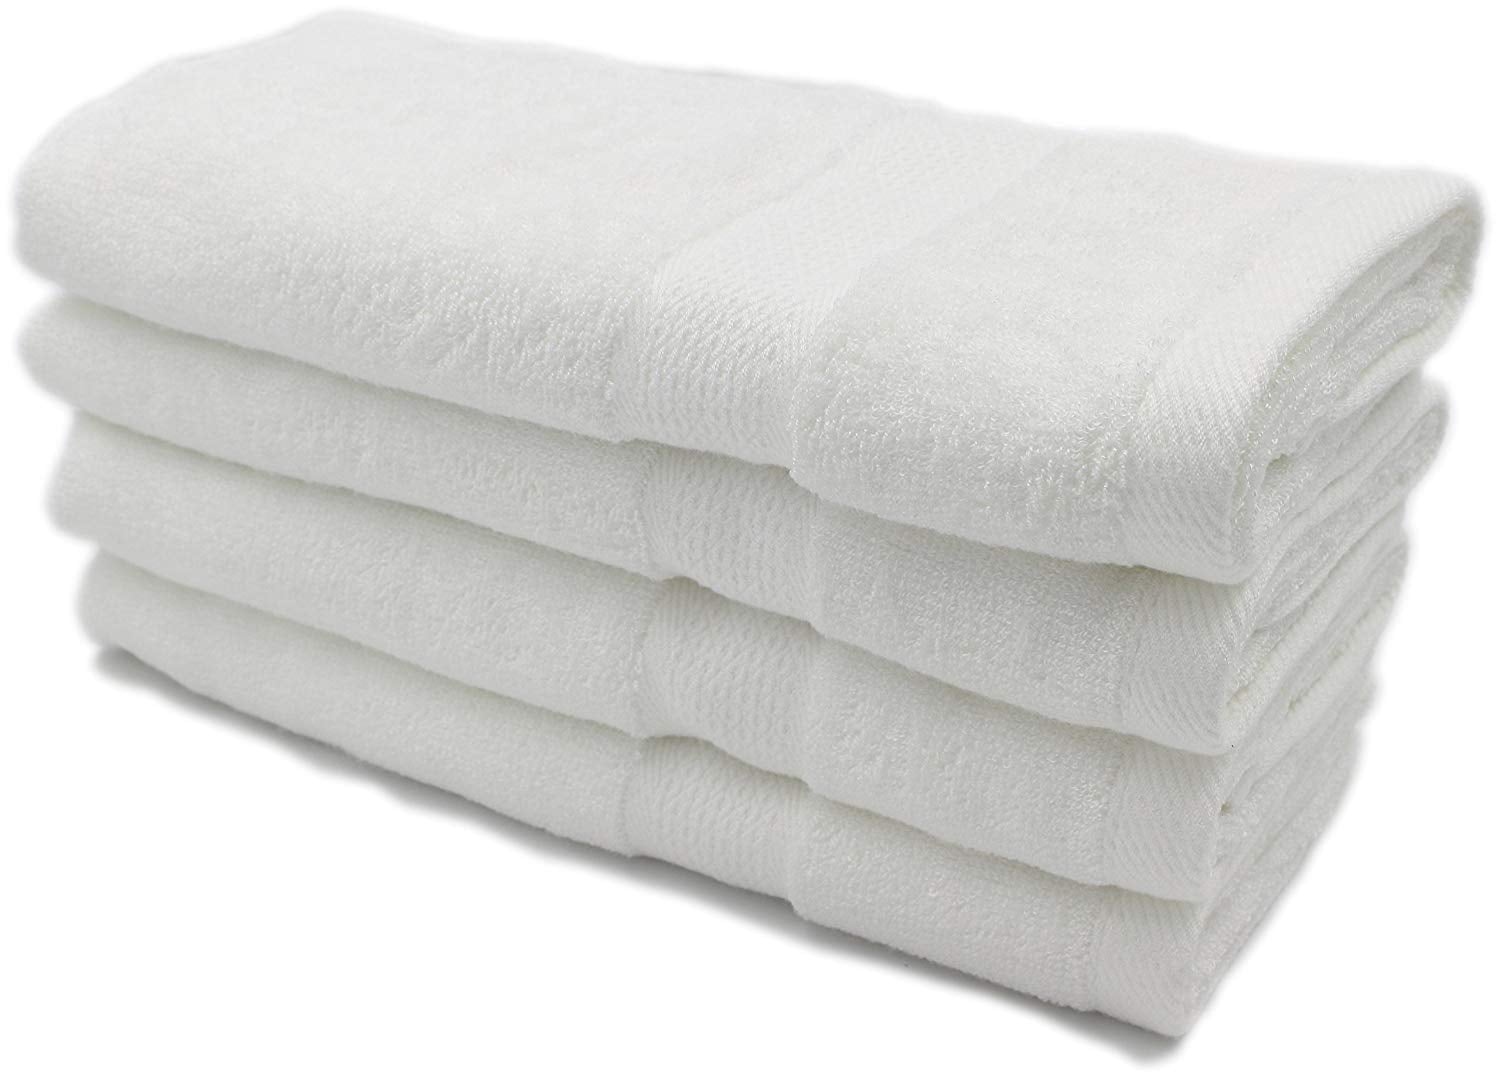 47 x 85 cm Absorbent & Durable Bathroom Towels 50% Bamboo 50% Cotton Hand Towels for Bathroom White Soft Premium 700GSM Hand Towels set Comvi Hand Towels for Bathroom set of 4 